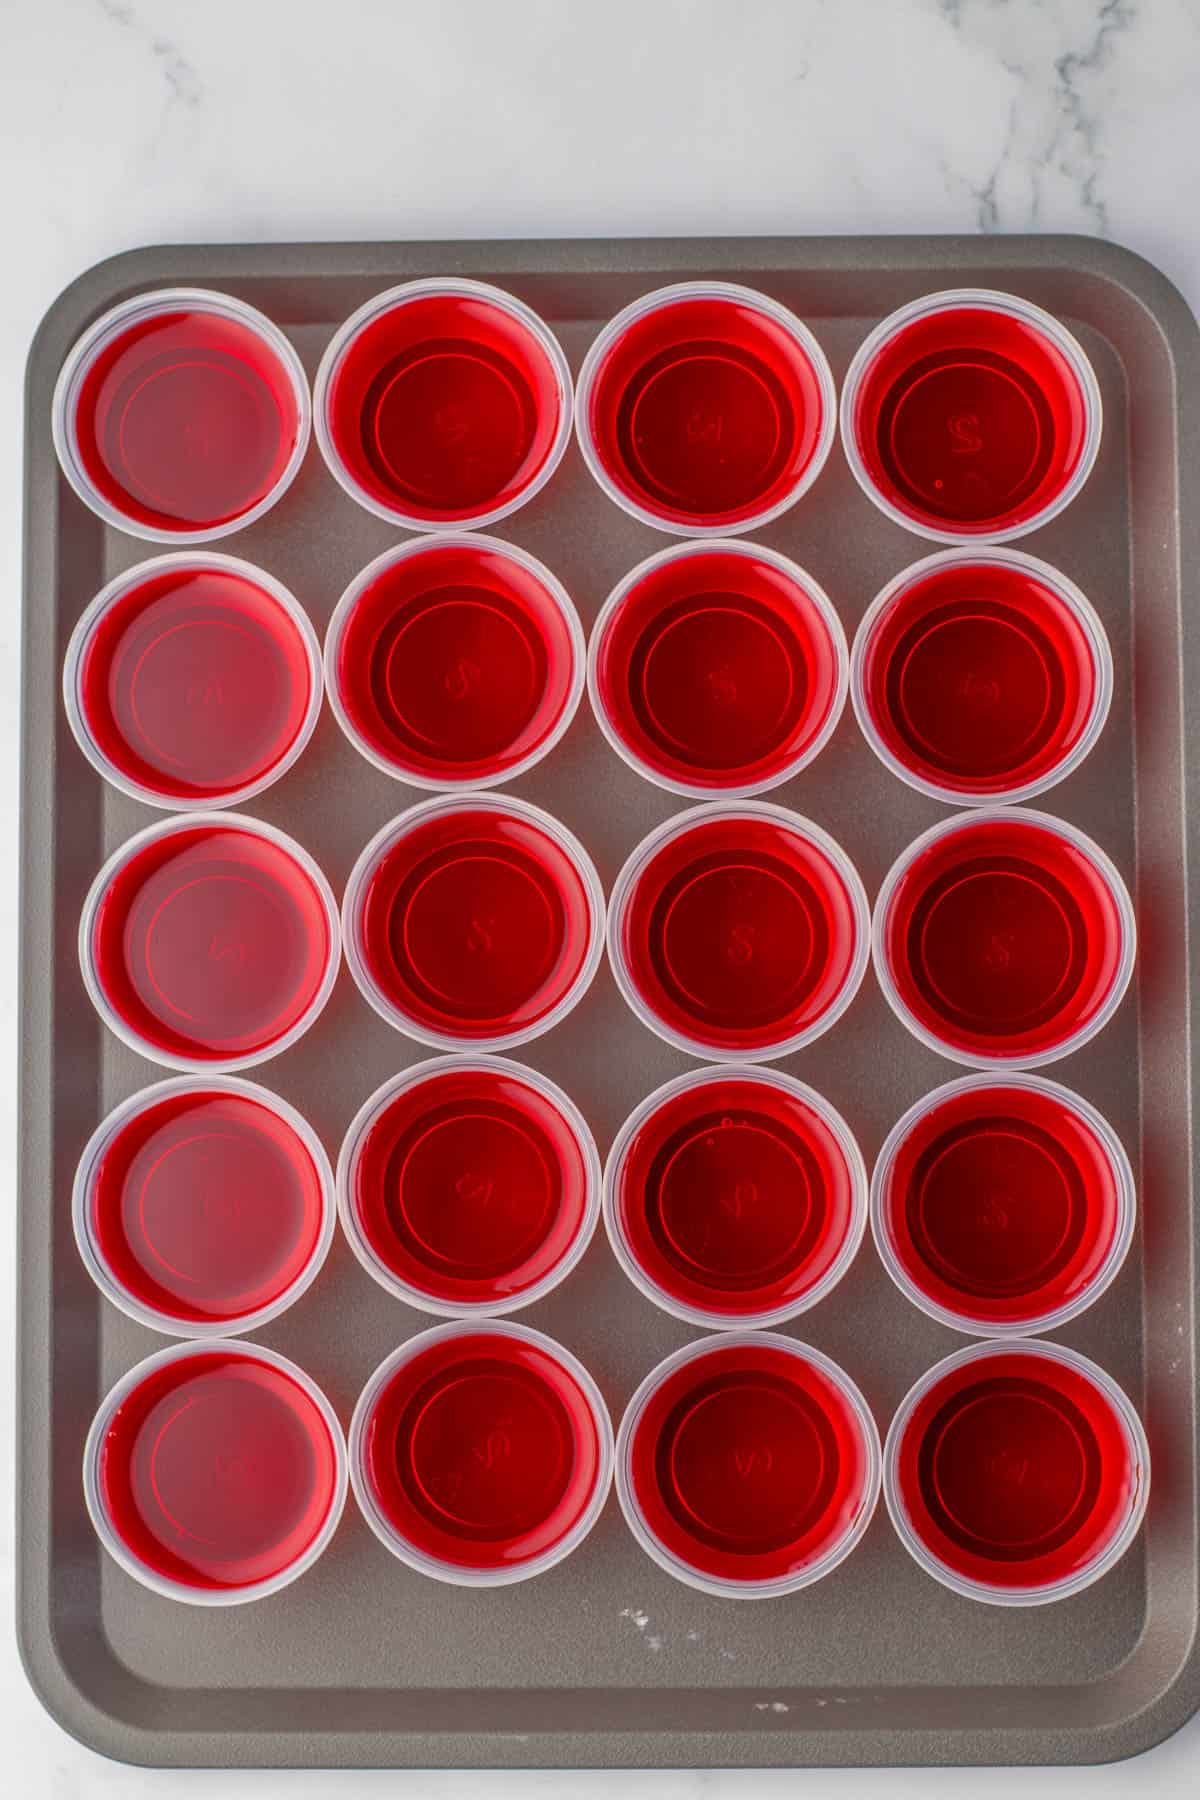 Vodka cranberry jello shots in little plastic shot cups on a cookie sheet.